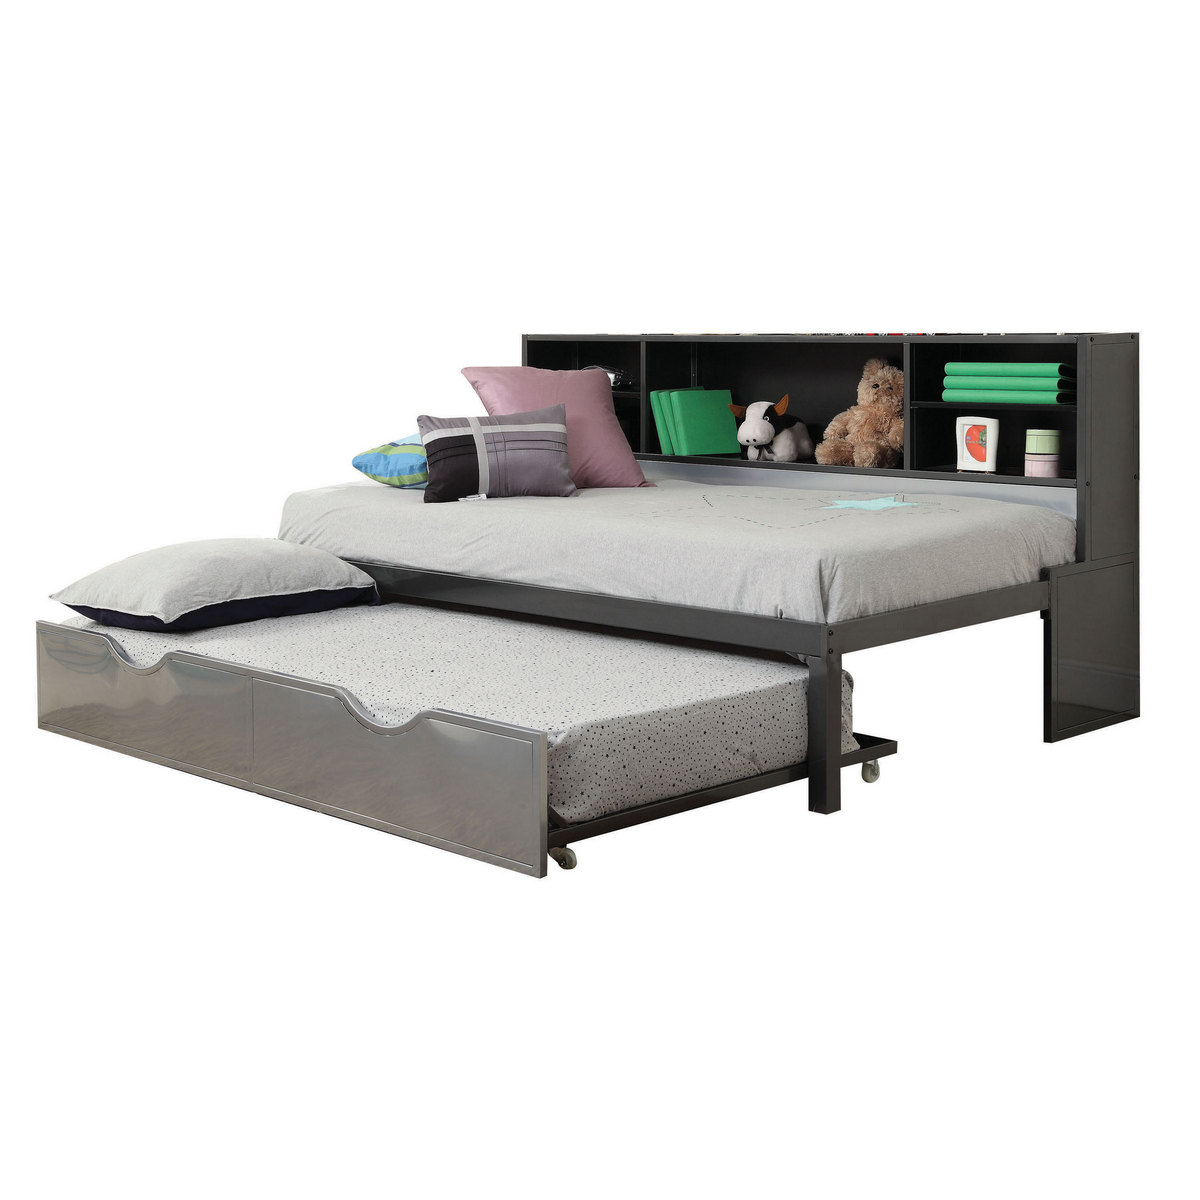 Acme Twin Bed Bookcase Trundle